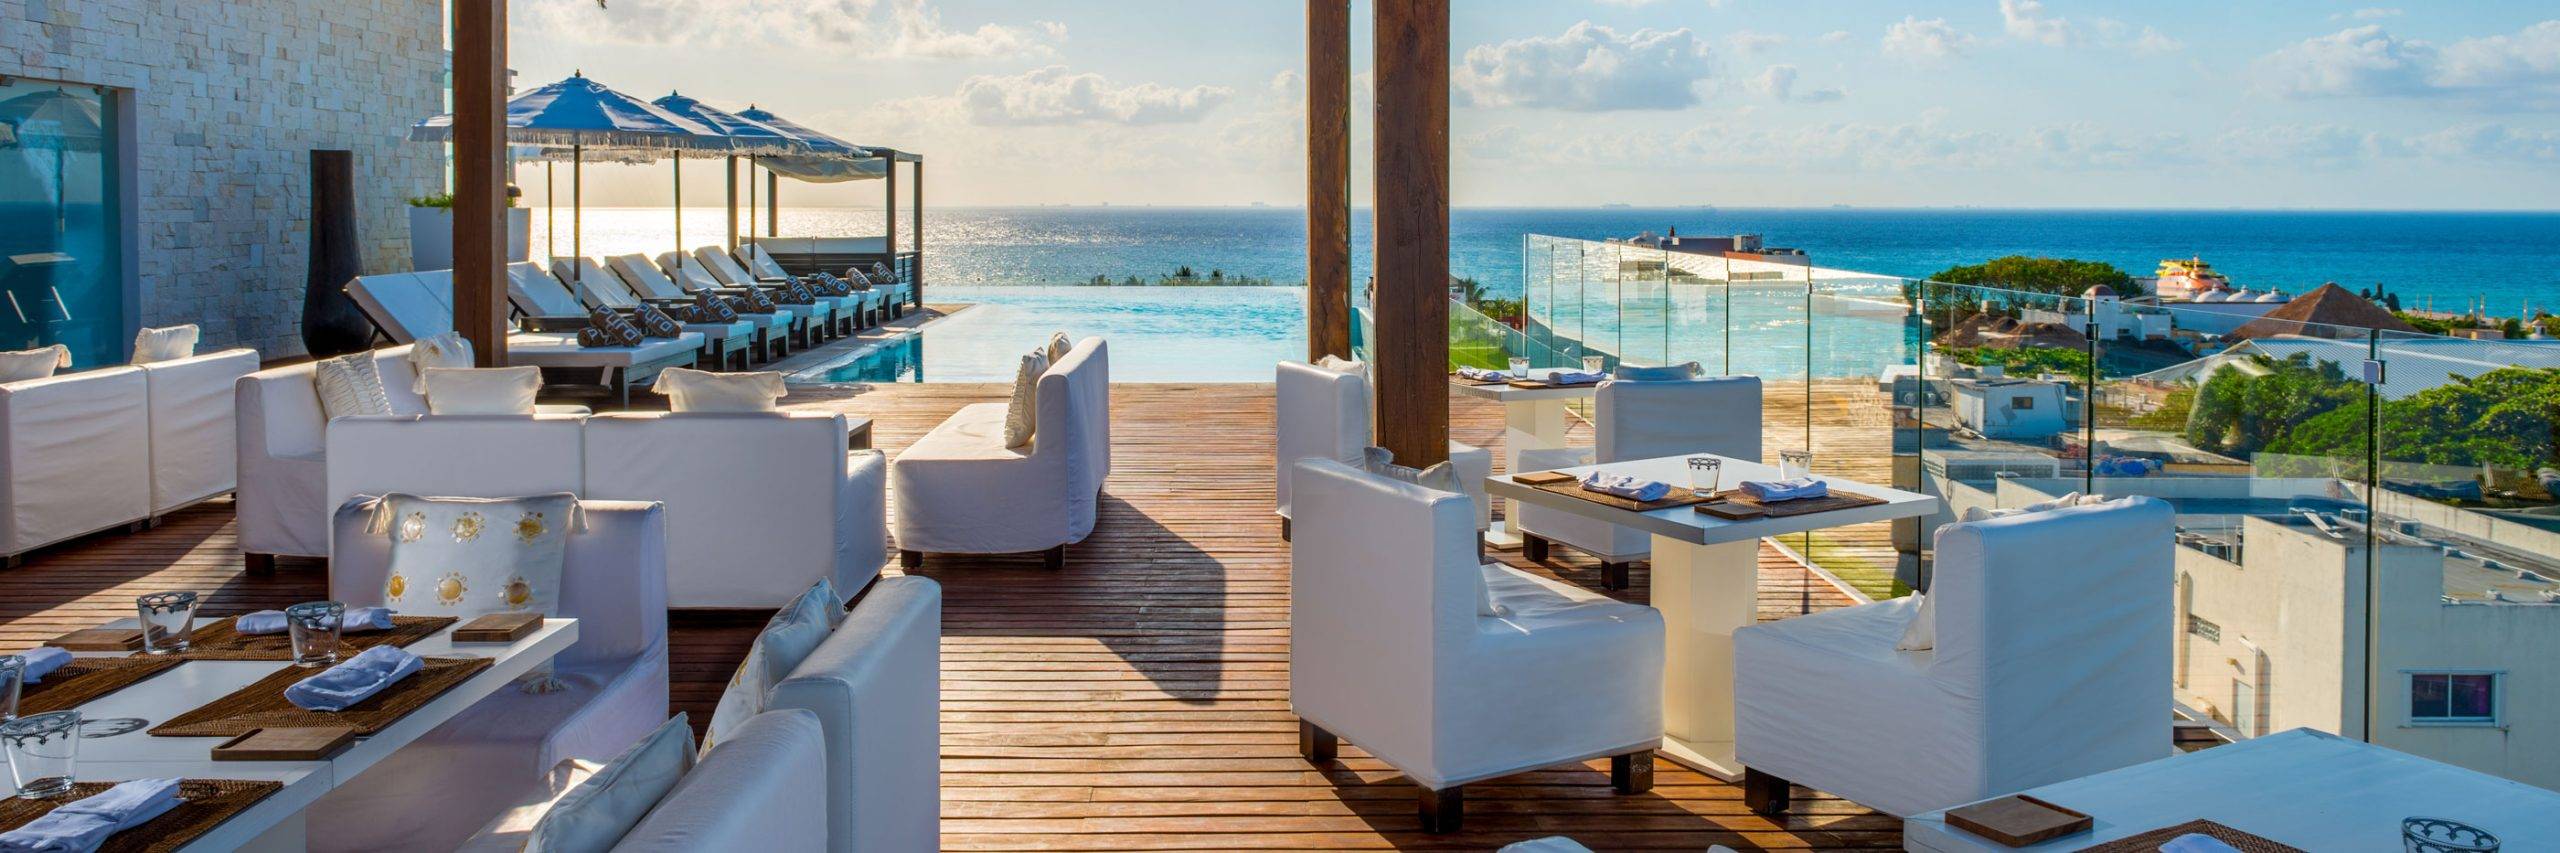 Playa del Carmen • The Fives Downtown Hotel & Residences